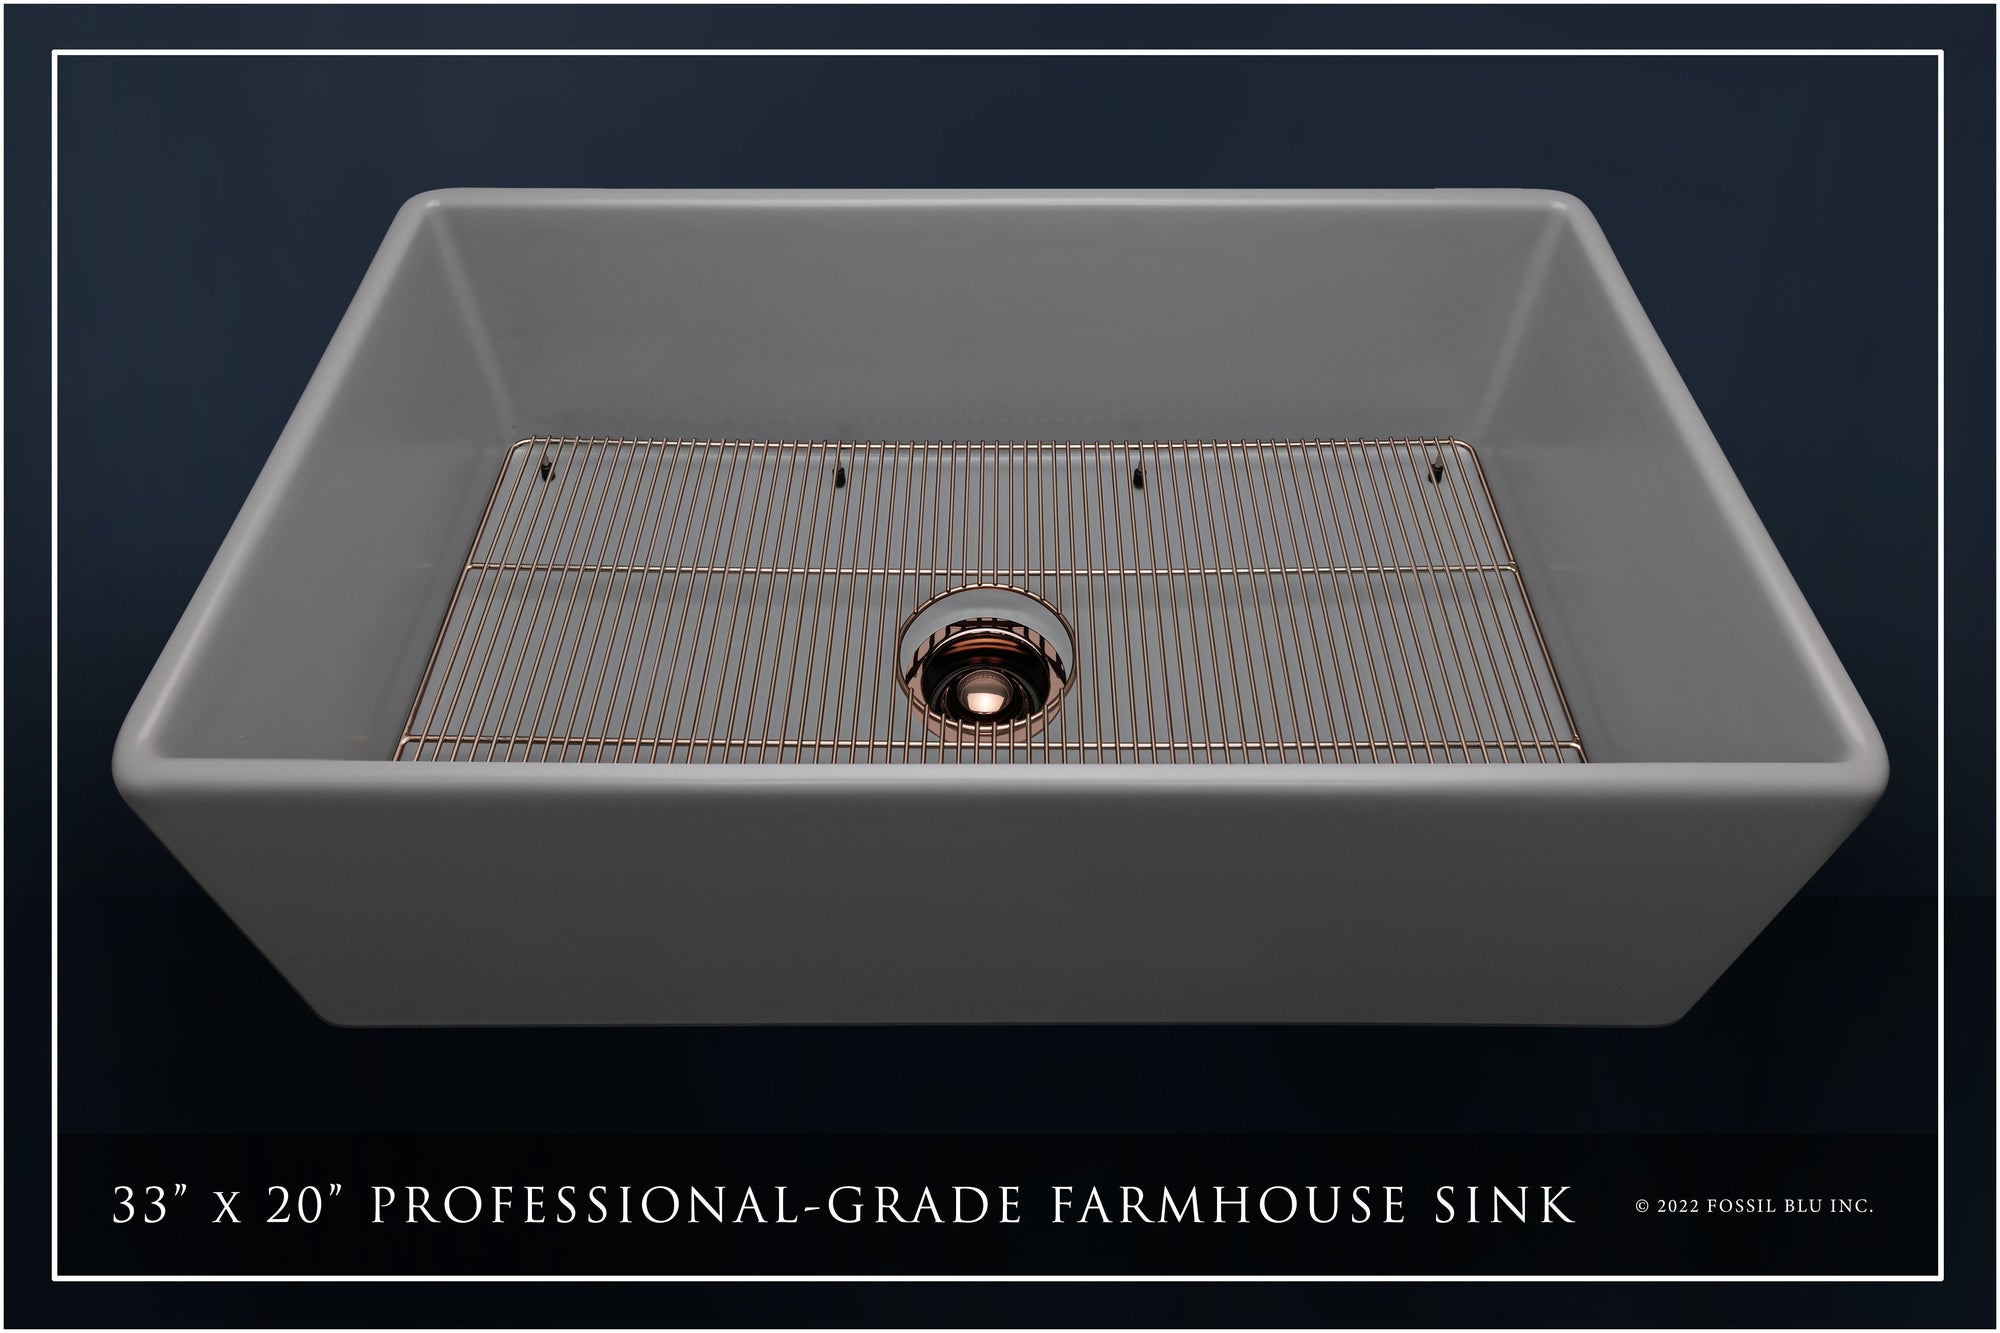 FSW1042RG LUXURY 33-INCH SOLID FIRECLAY FARMHOUSE SINK, MATTE GRAY, POL. ROSE GOLD ACCS, FLAT FRONT